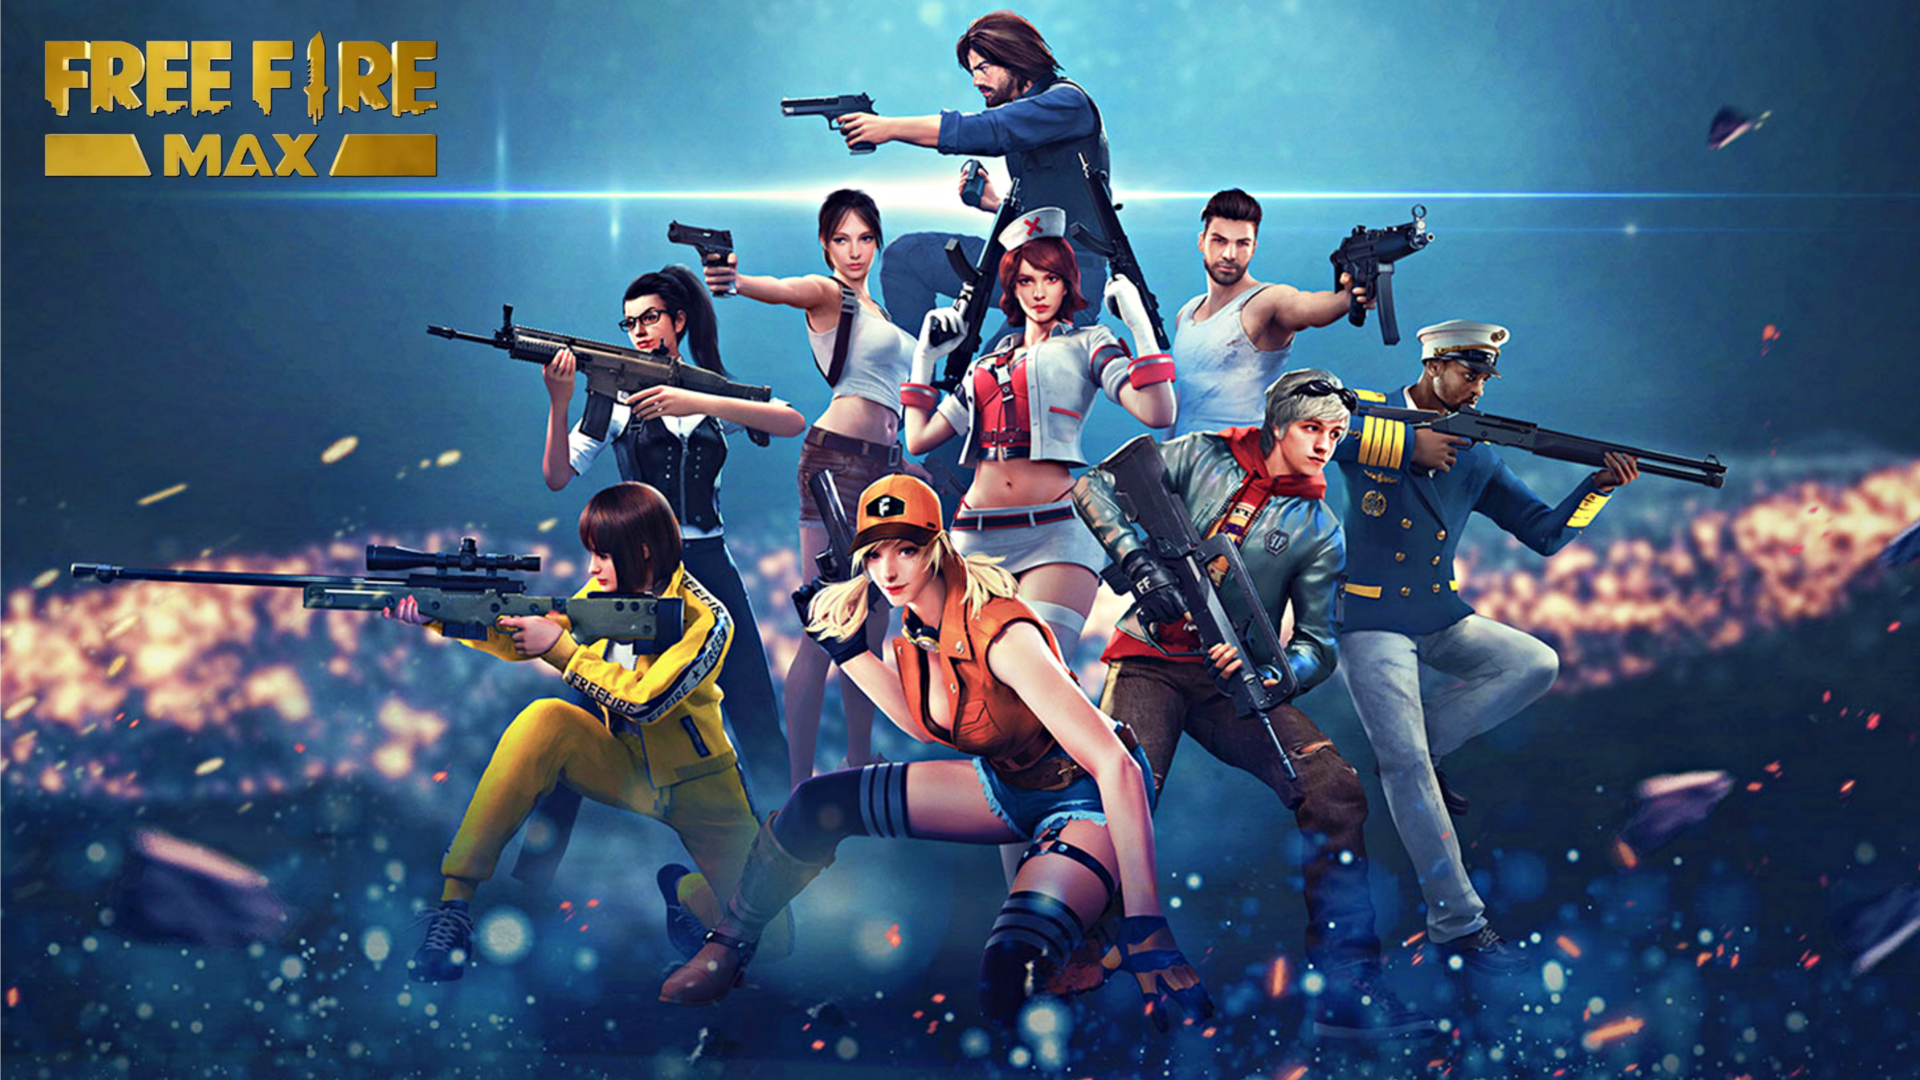 Free Fire MAX's May 10 codes: How to redeem rewards